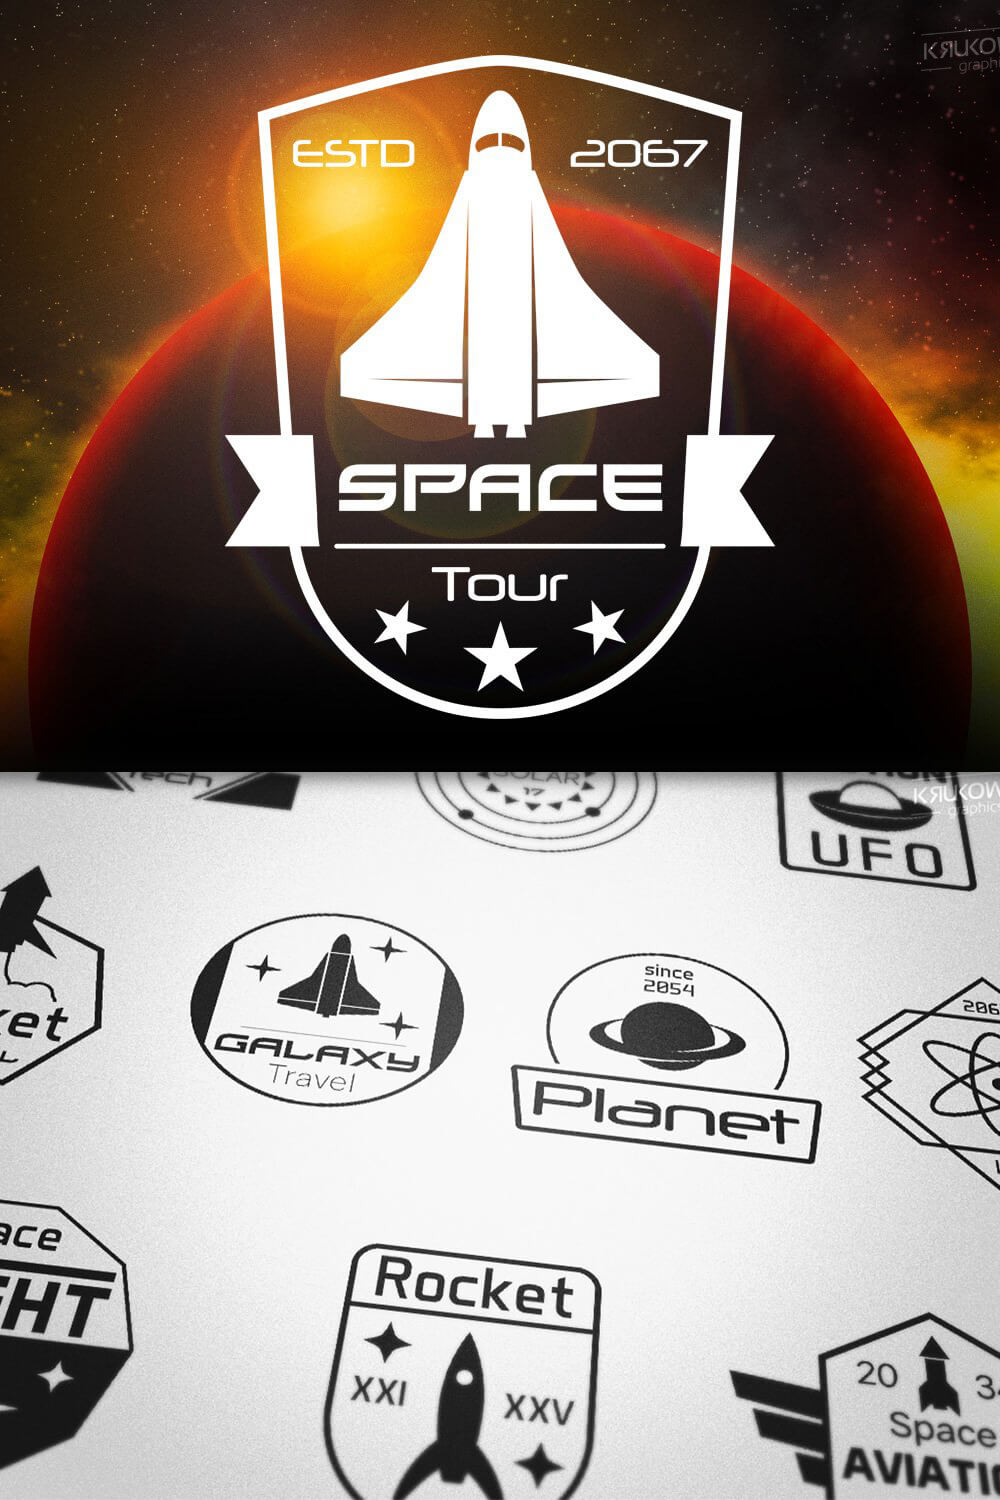 Two variants of space logos.